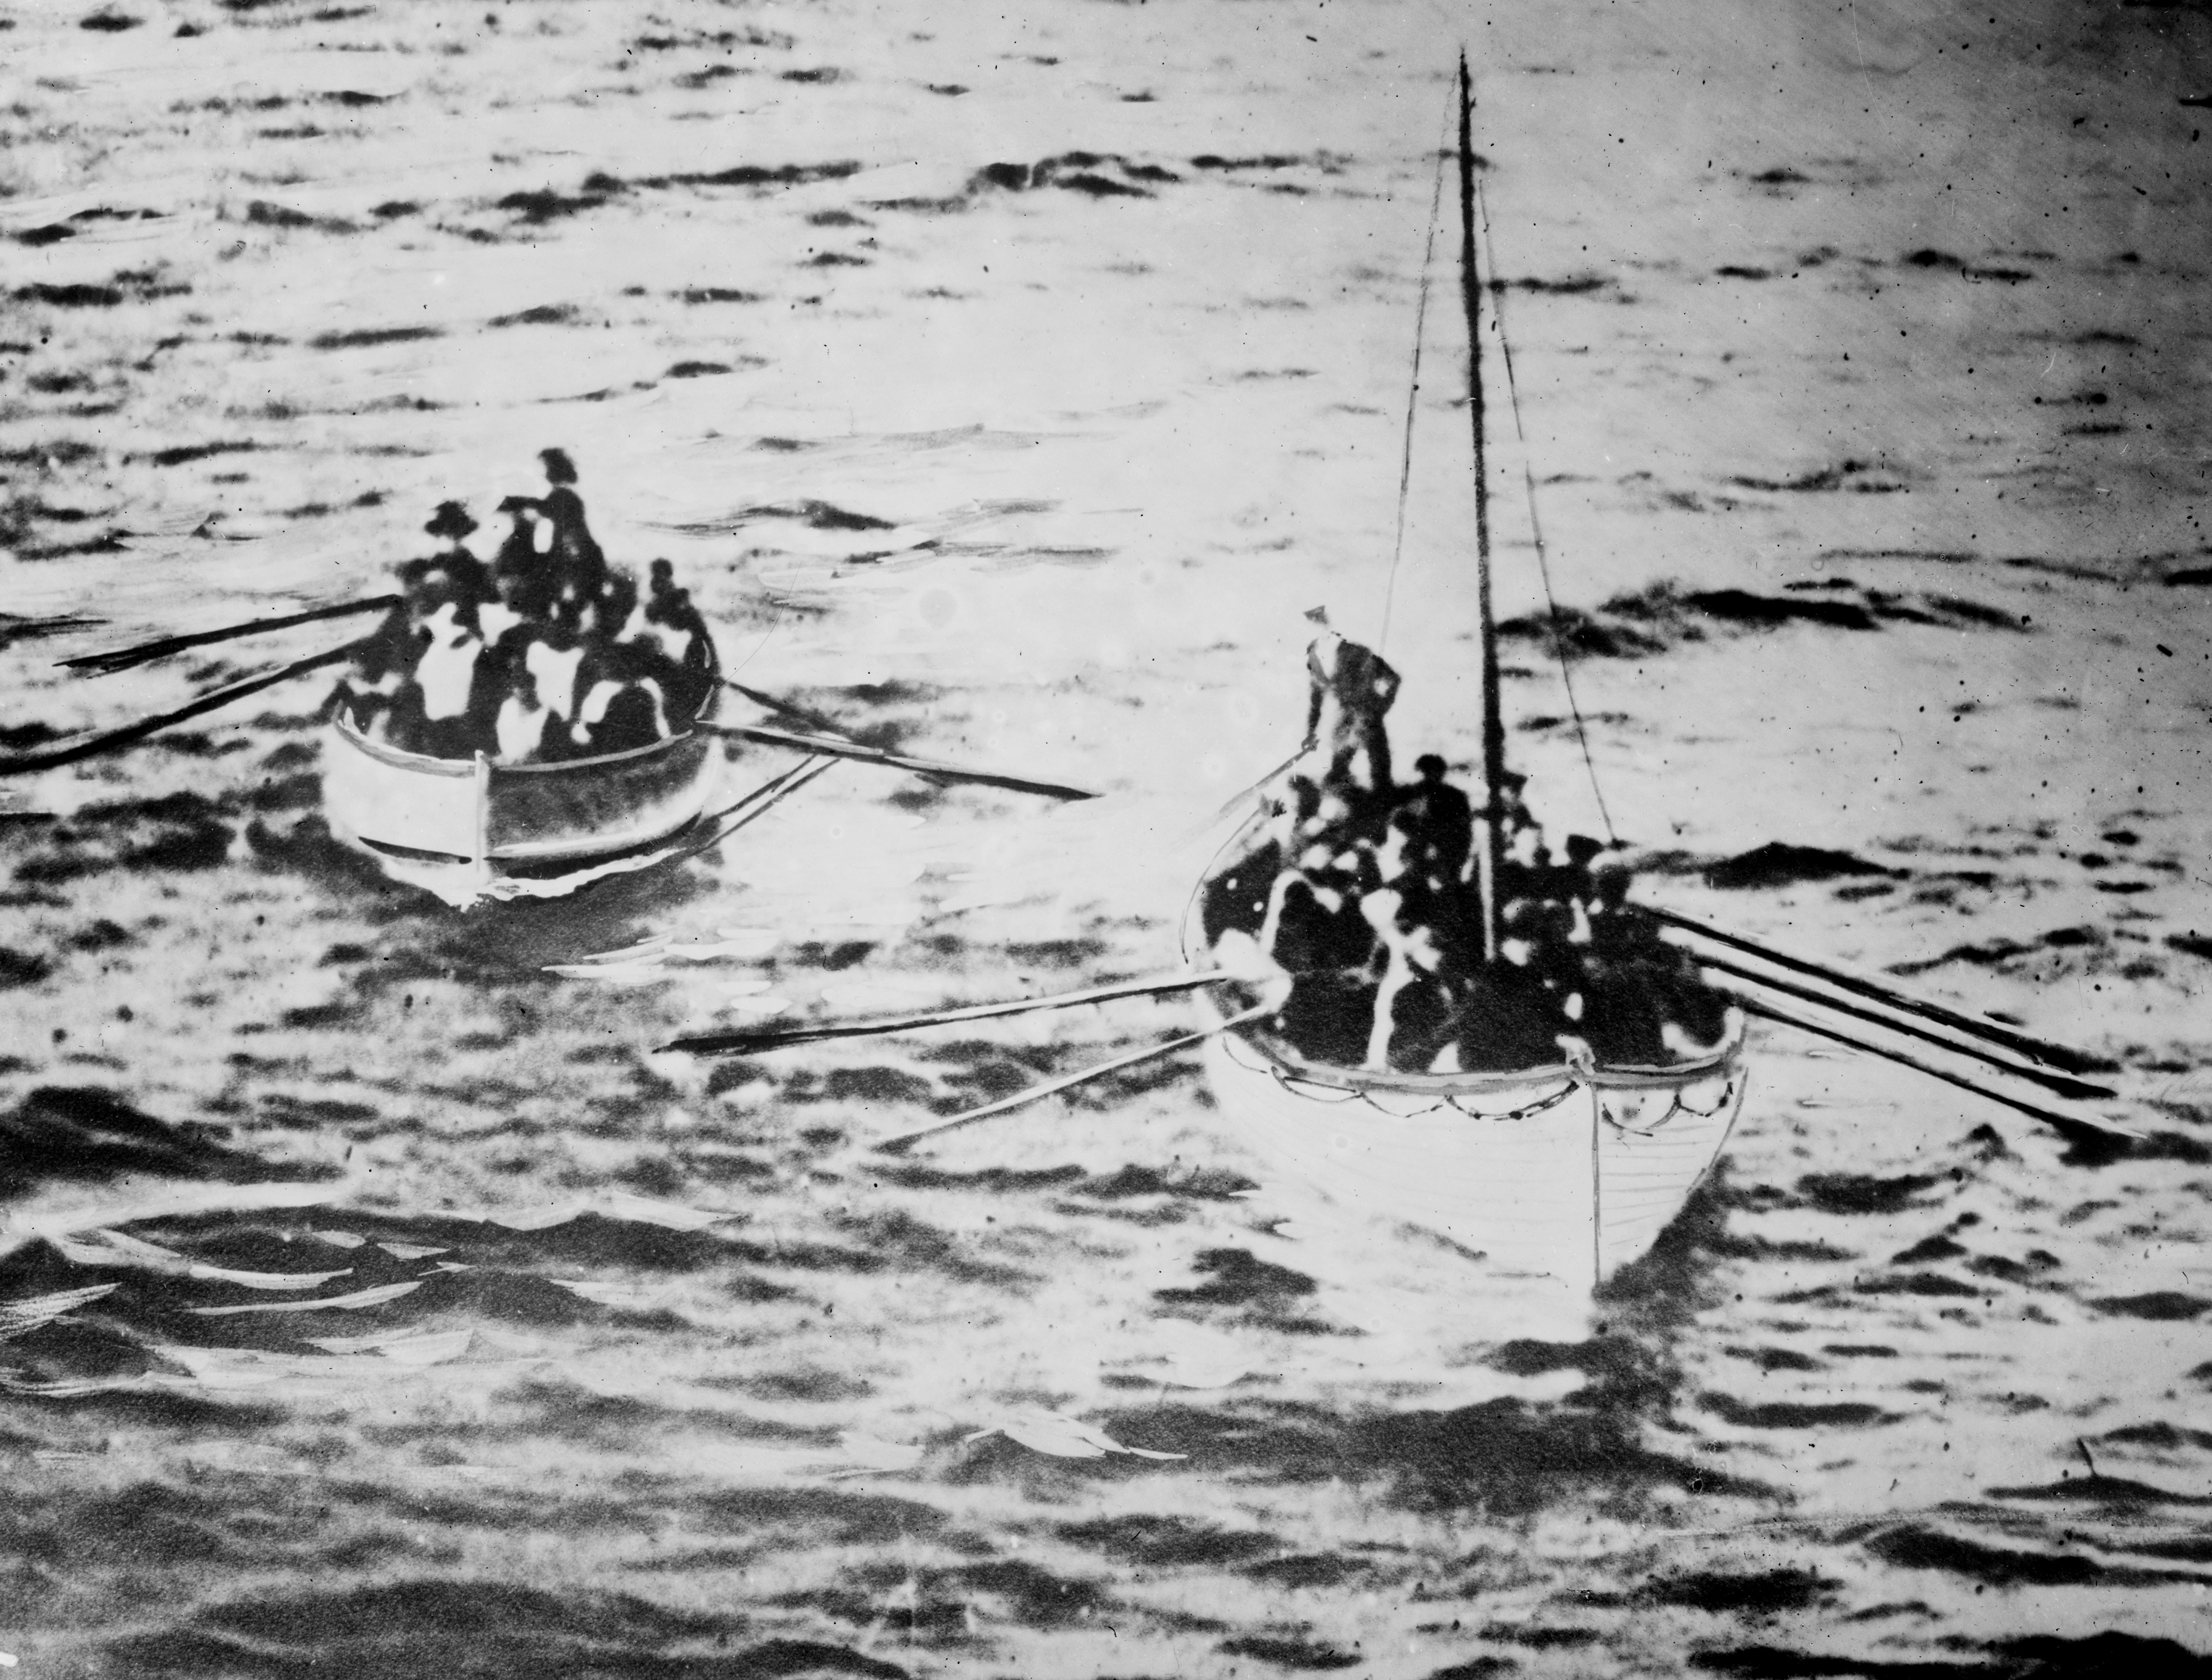 Rescue crews reveal the grisly aftermath of the Titanic tragedy - NZ Herald